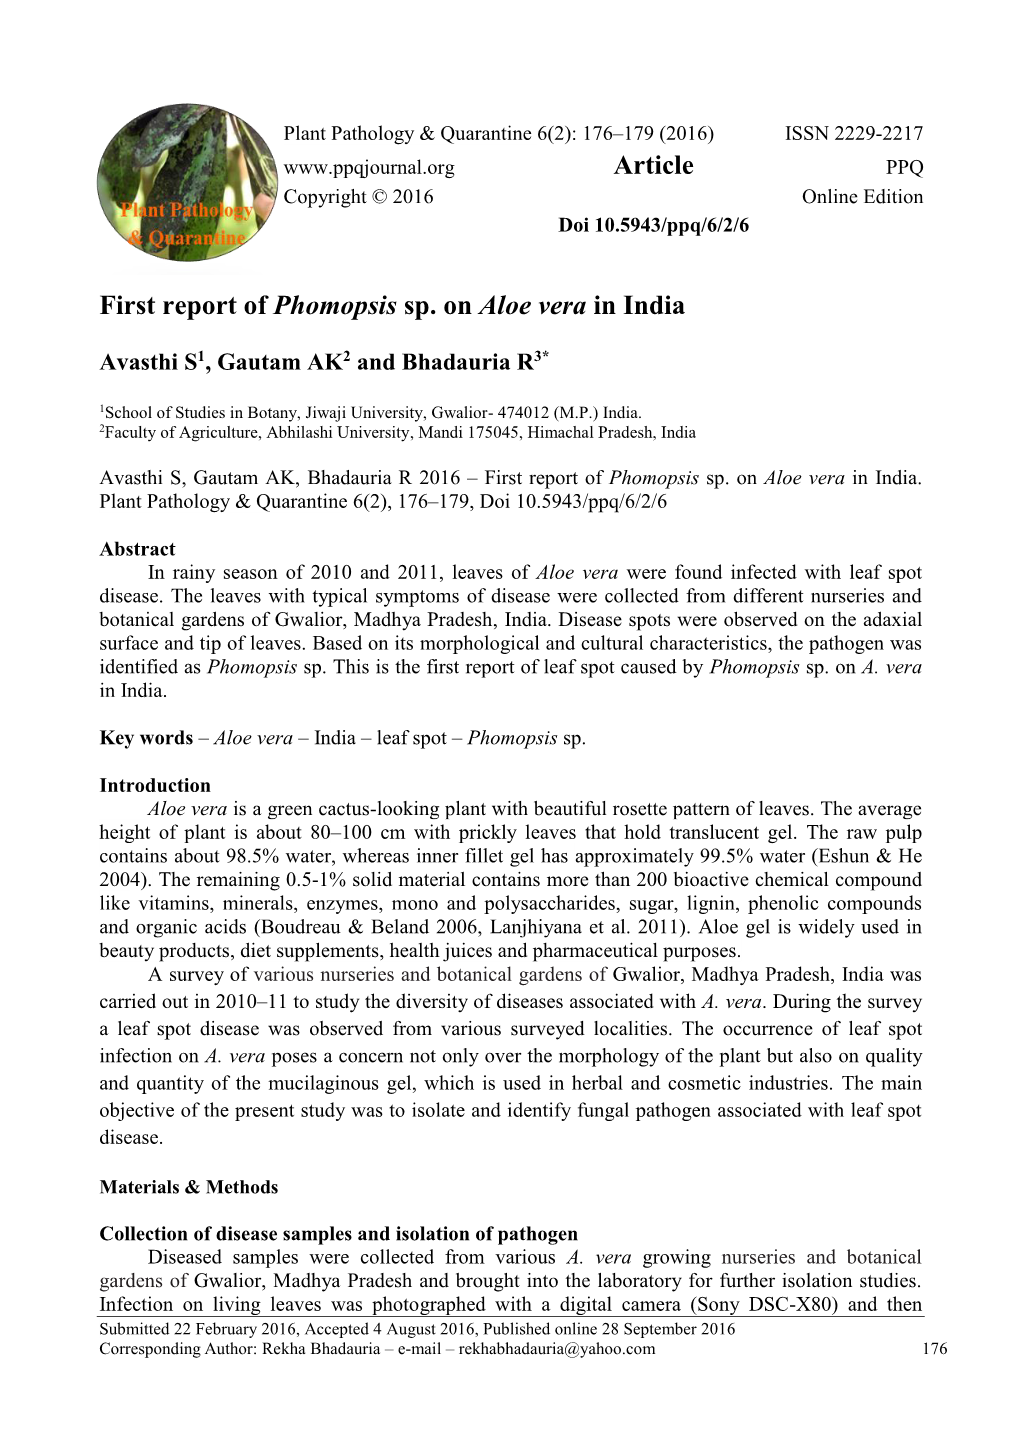 First Report of Phomopsis Sp. on Aloe Vera in India